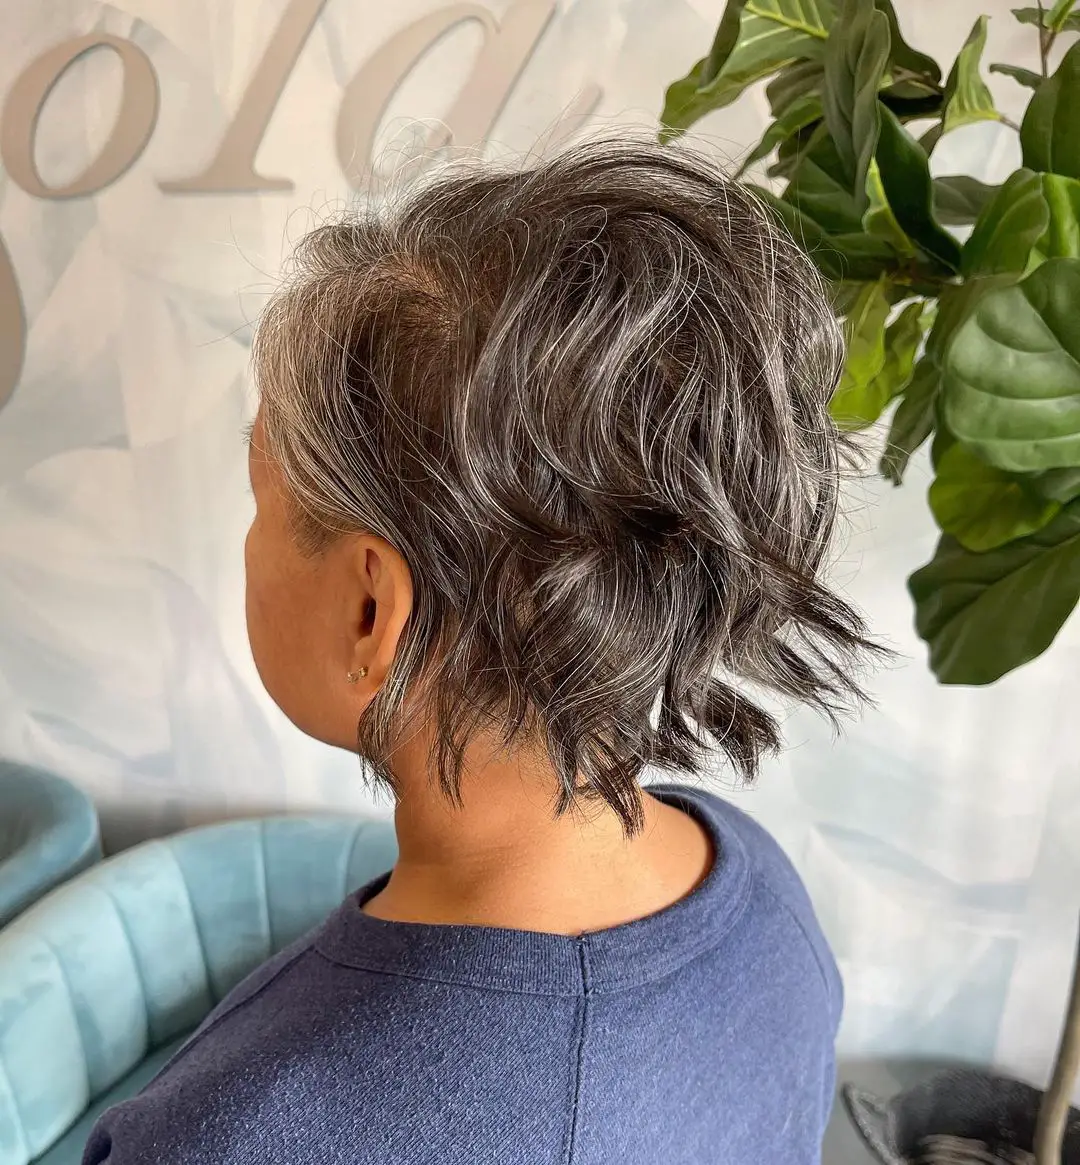 36-hairstyles-for-gorgeous-gray-hair Short Tousled Curls for Fine Hair